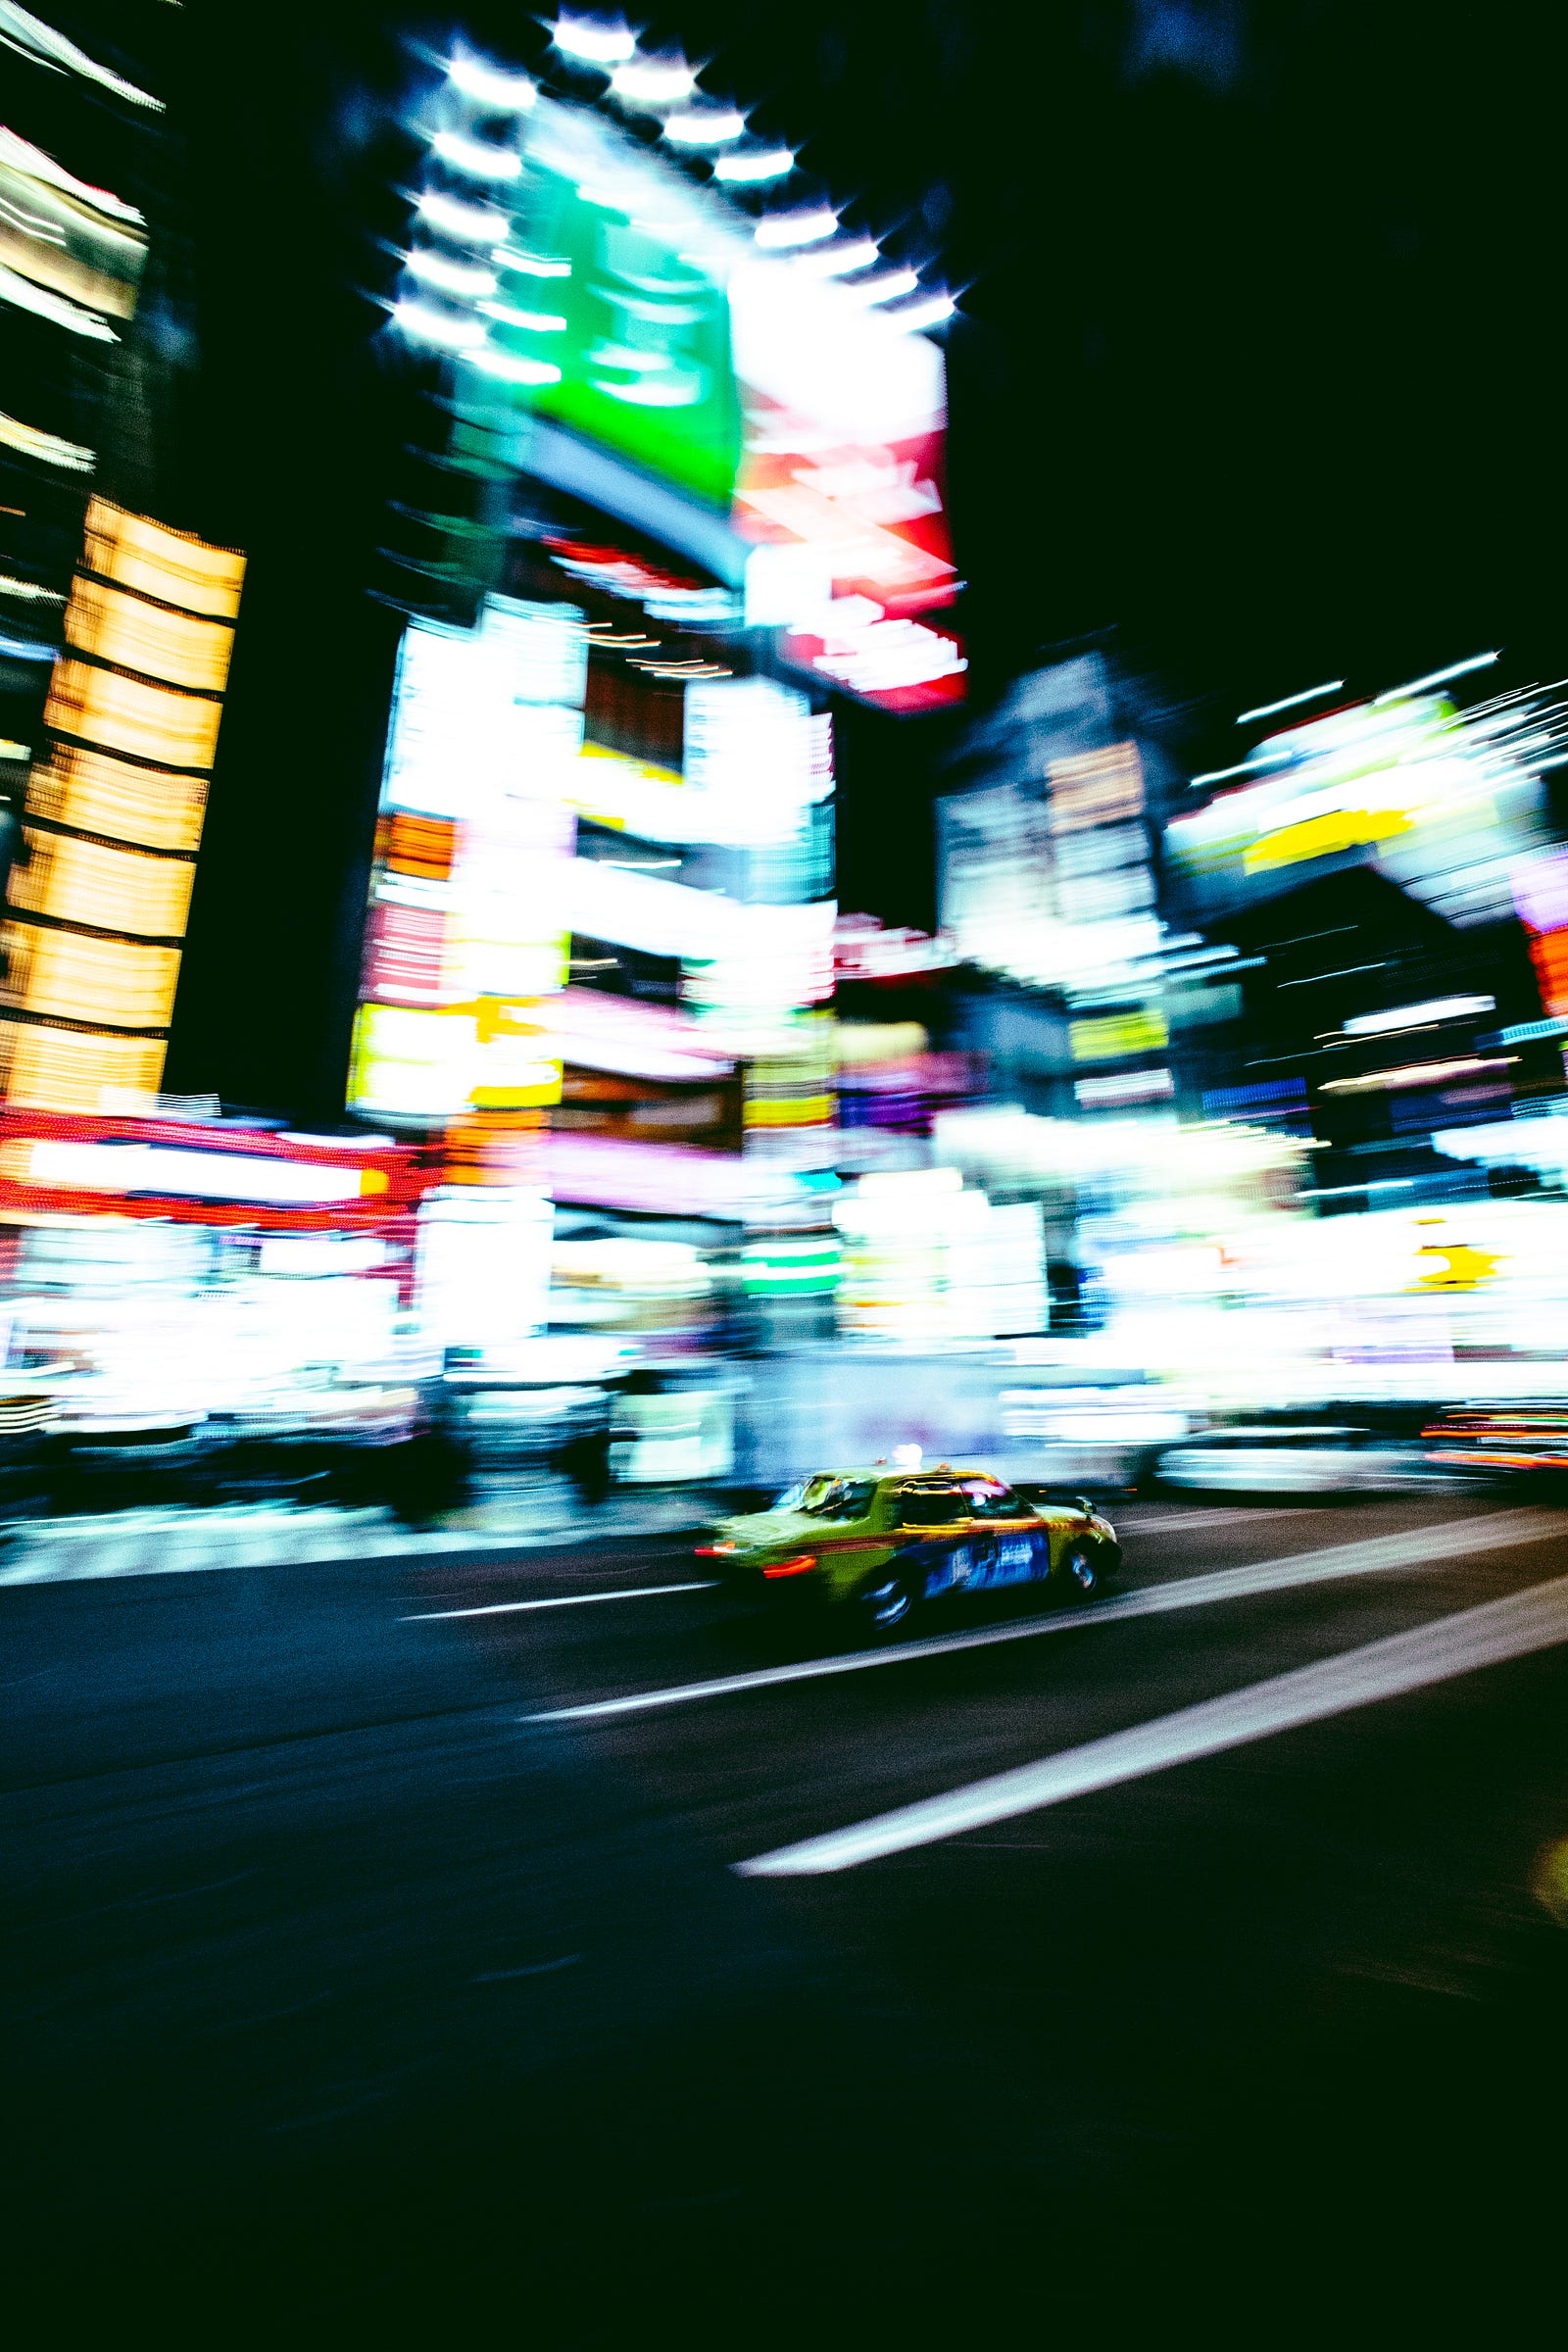 A taxi rolls to the right, as we see a background of blurred buildings at night (perhaps in Tokyo). There is a renewed interest in hallucinogens, especially for psychiatric disorders. The last decade has witnessed several clinical (and laboratory) studies showing the effectiveness of ketamine for managing depression.